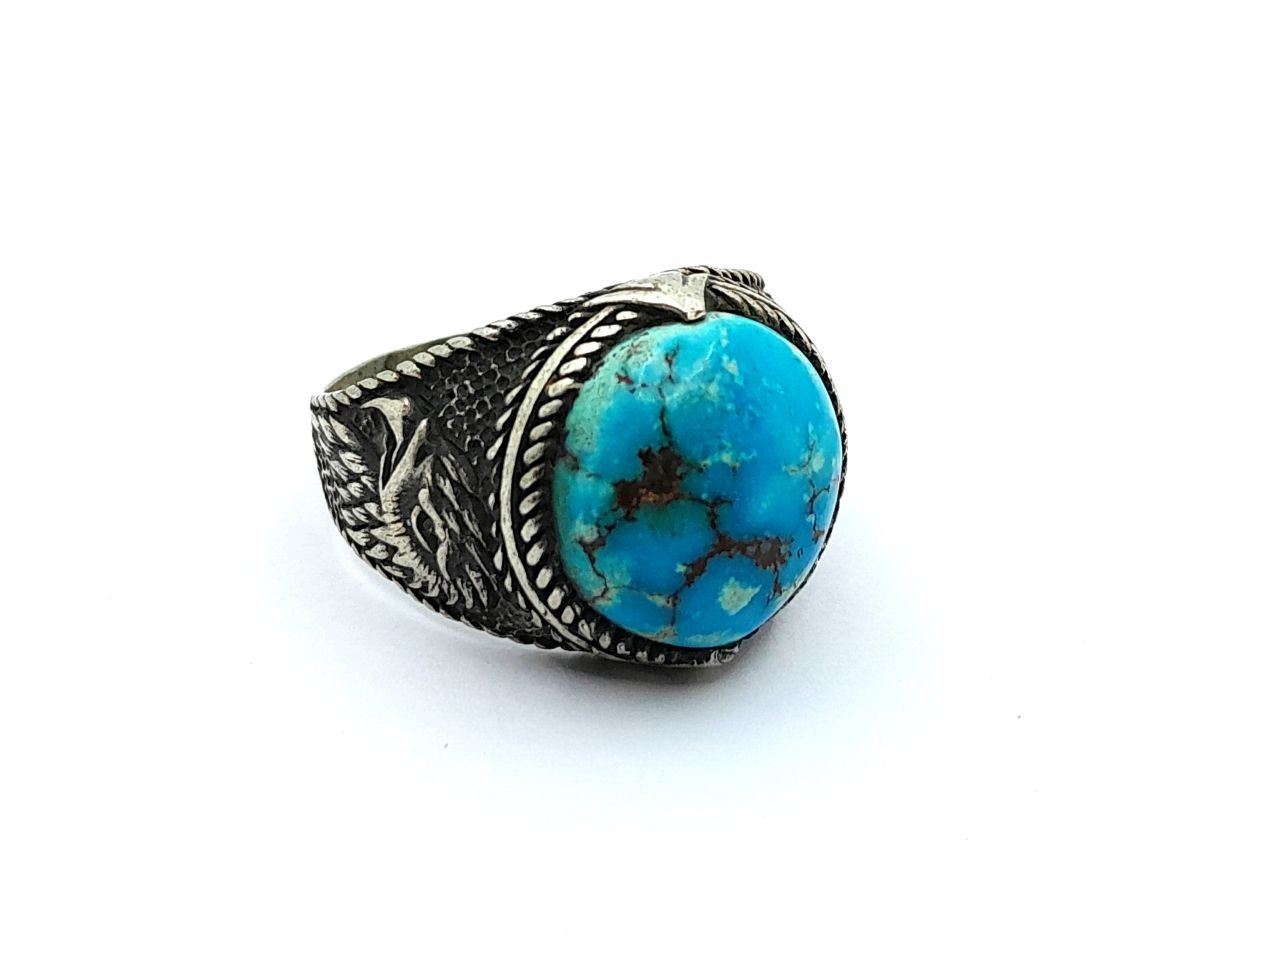 Ring with a turquoise stone